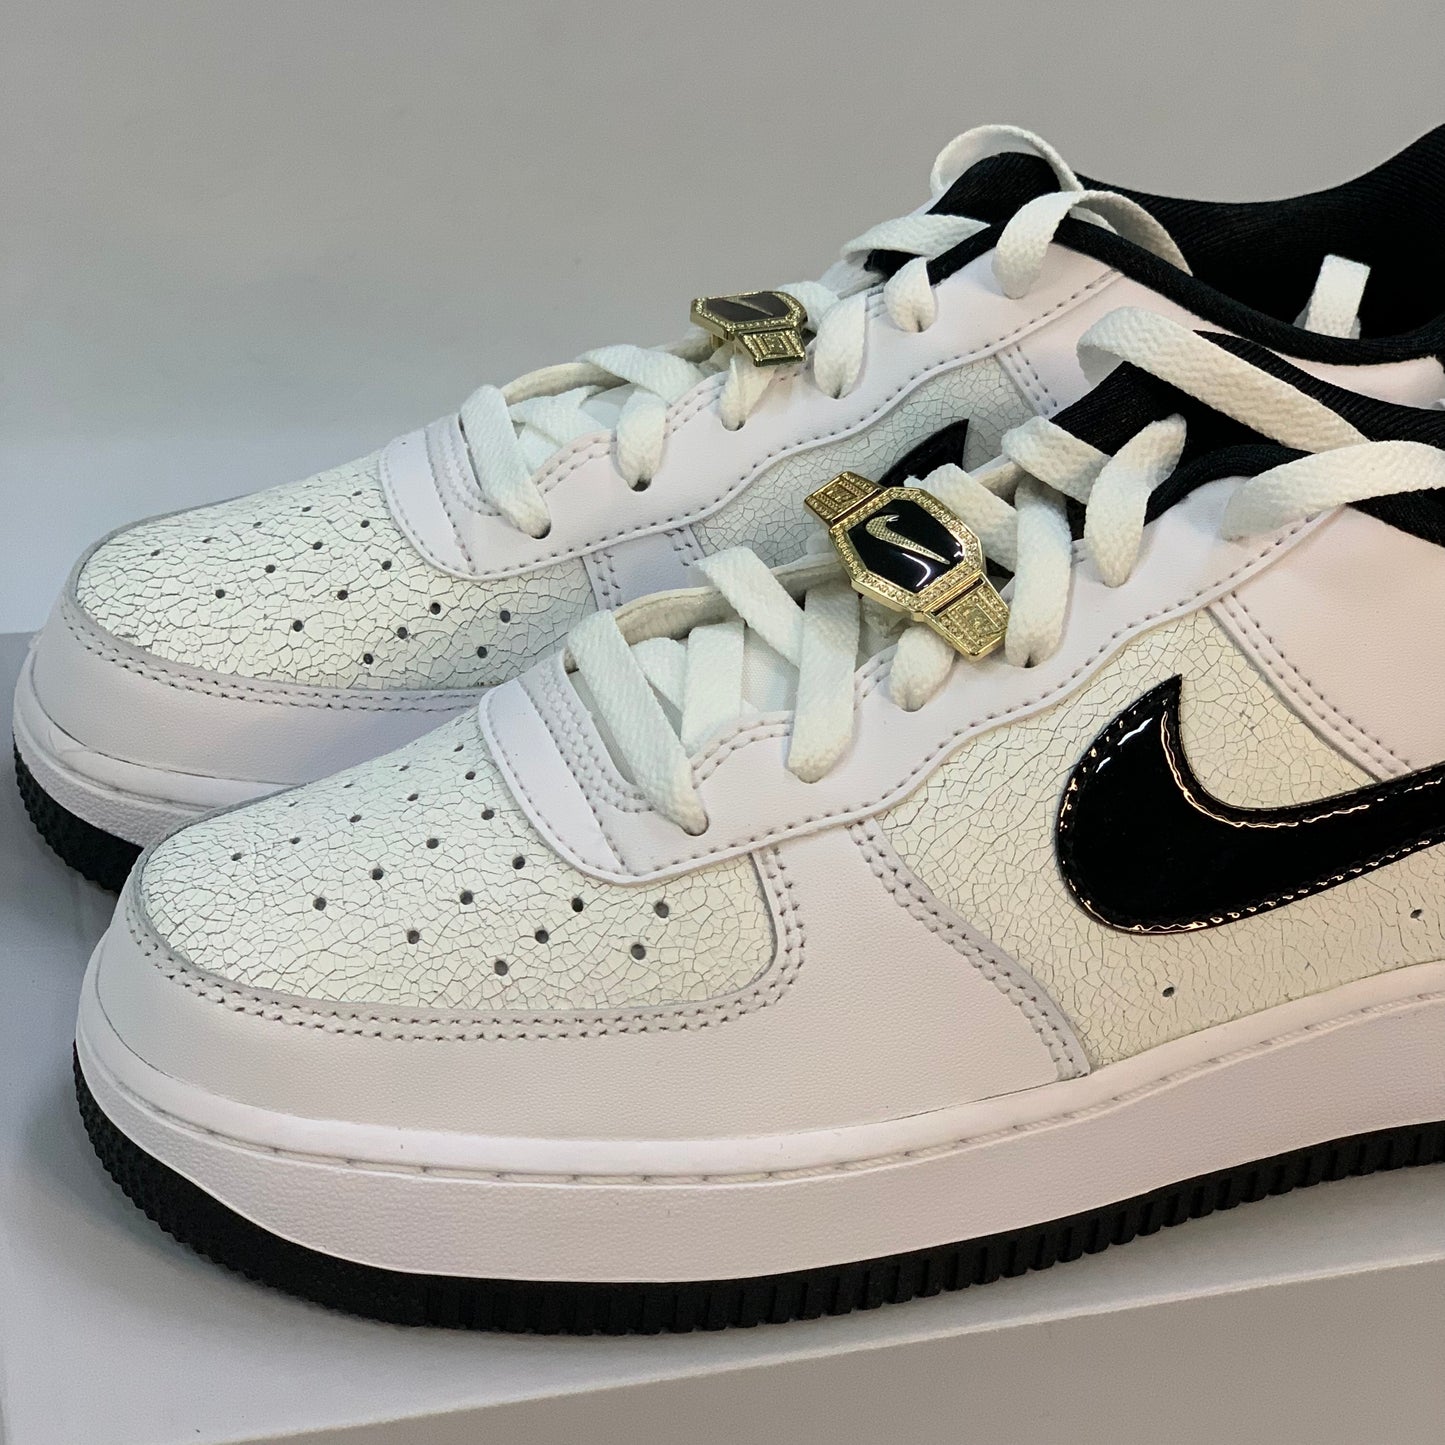 Nike Air Force 1 Low Worldchampion (GS)